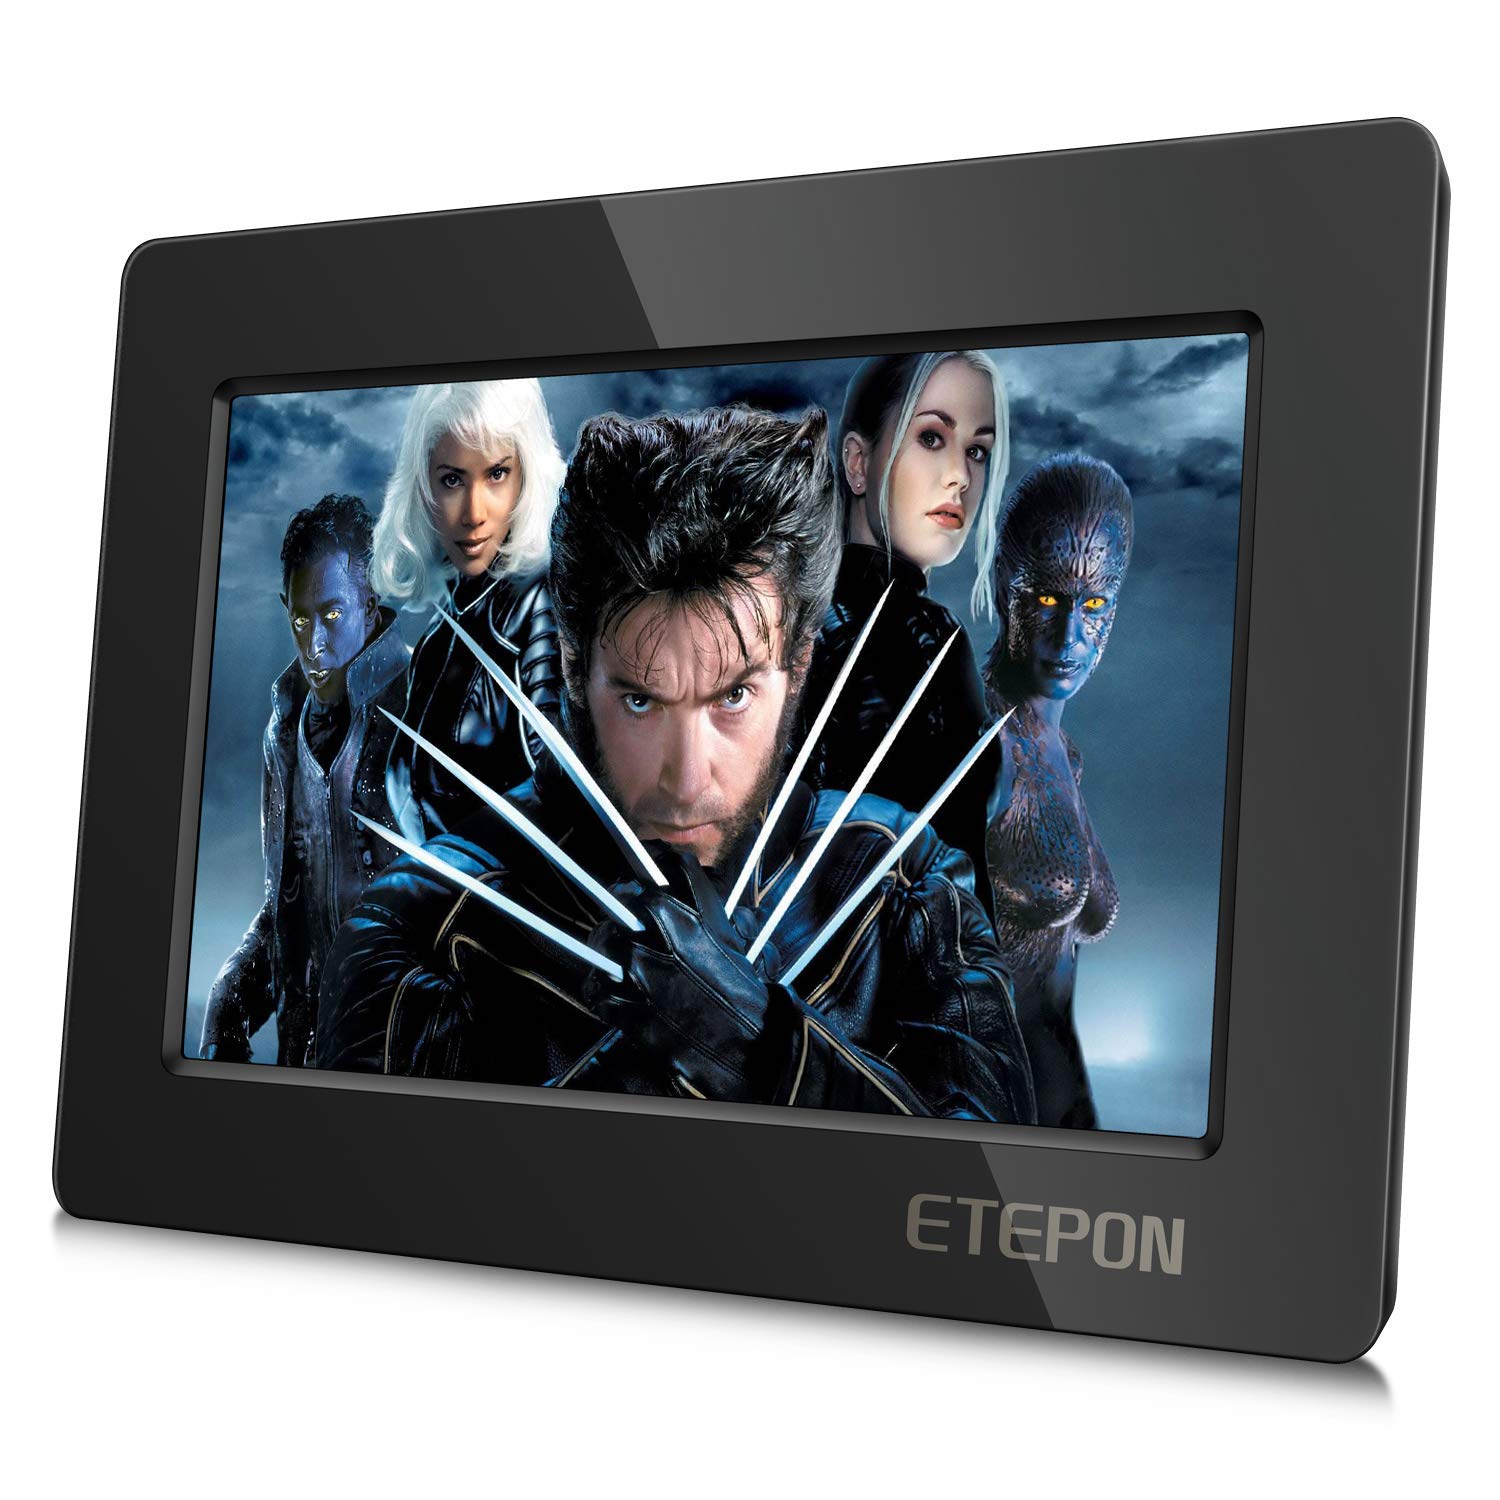 ETEPON Capacitive Touch LCD Display HDMI Input 1024Ã— 600 with Case Stand